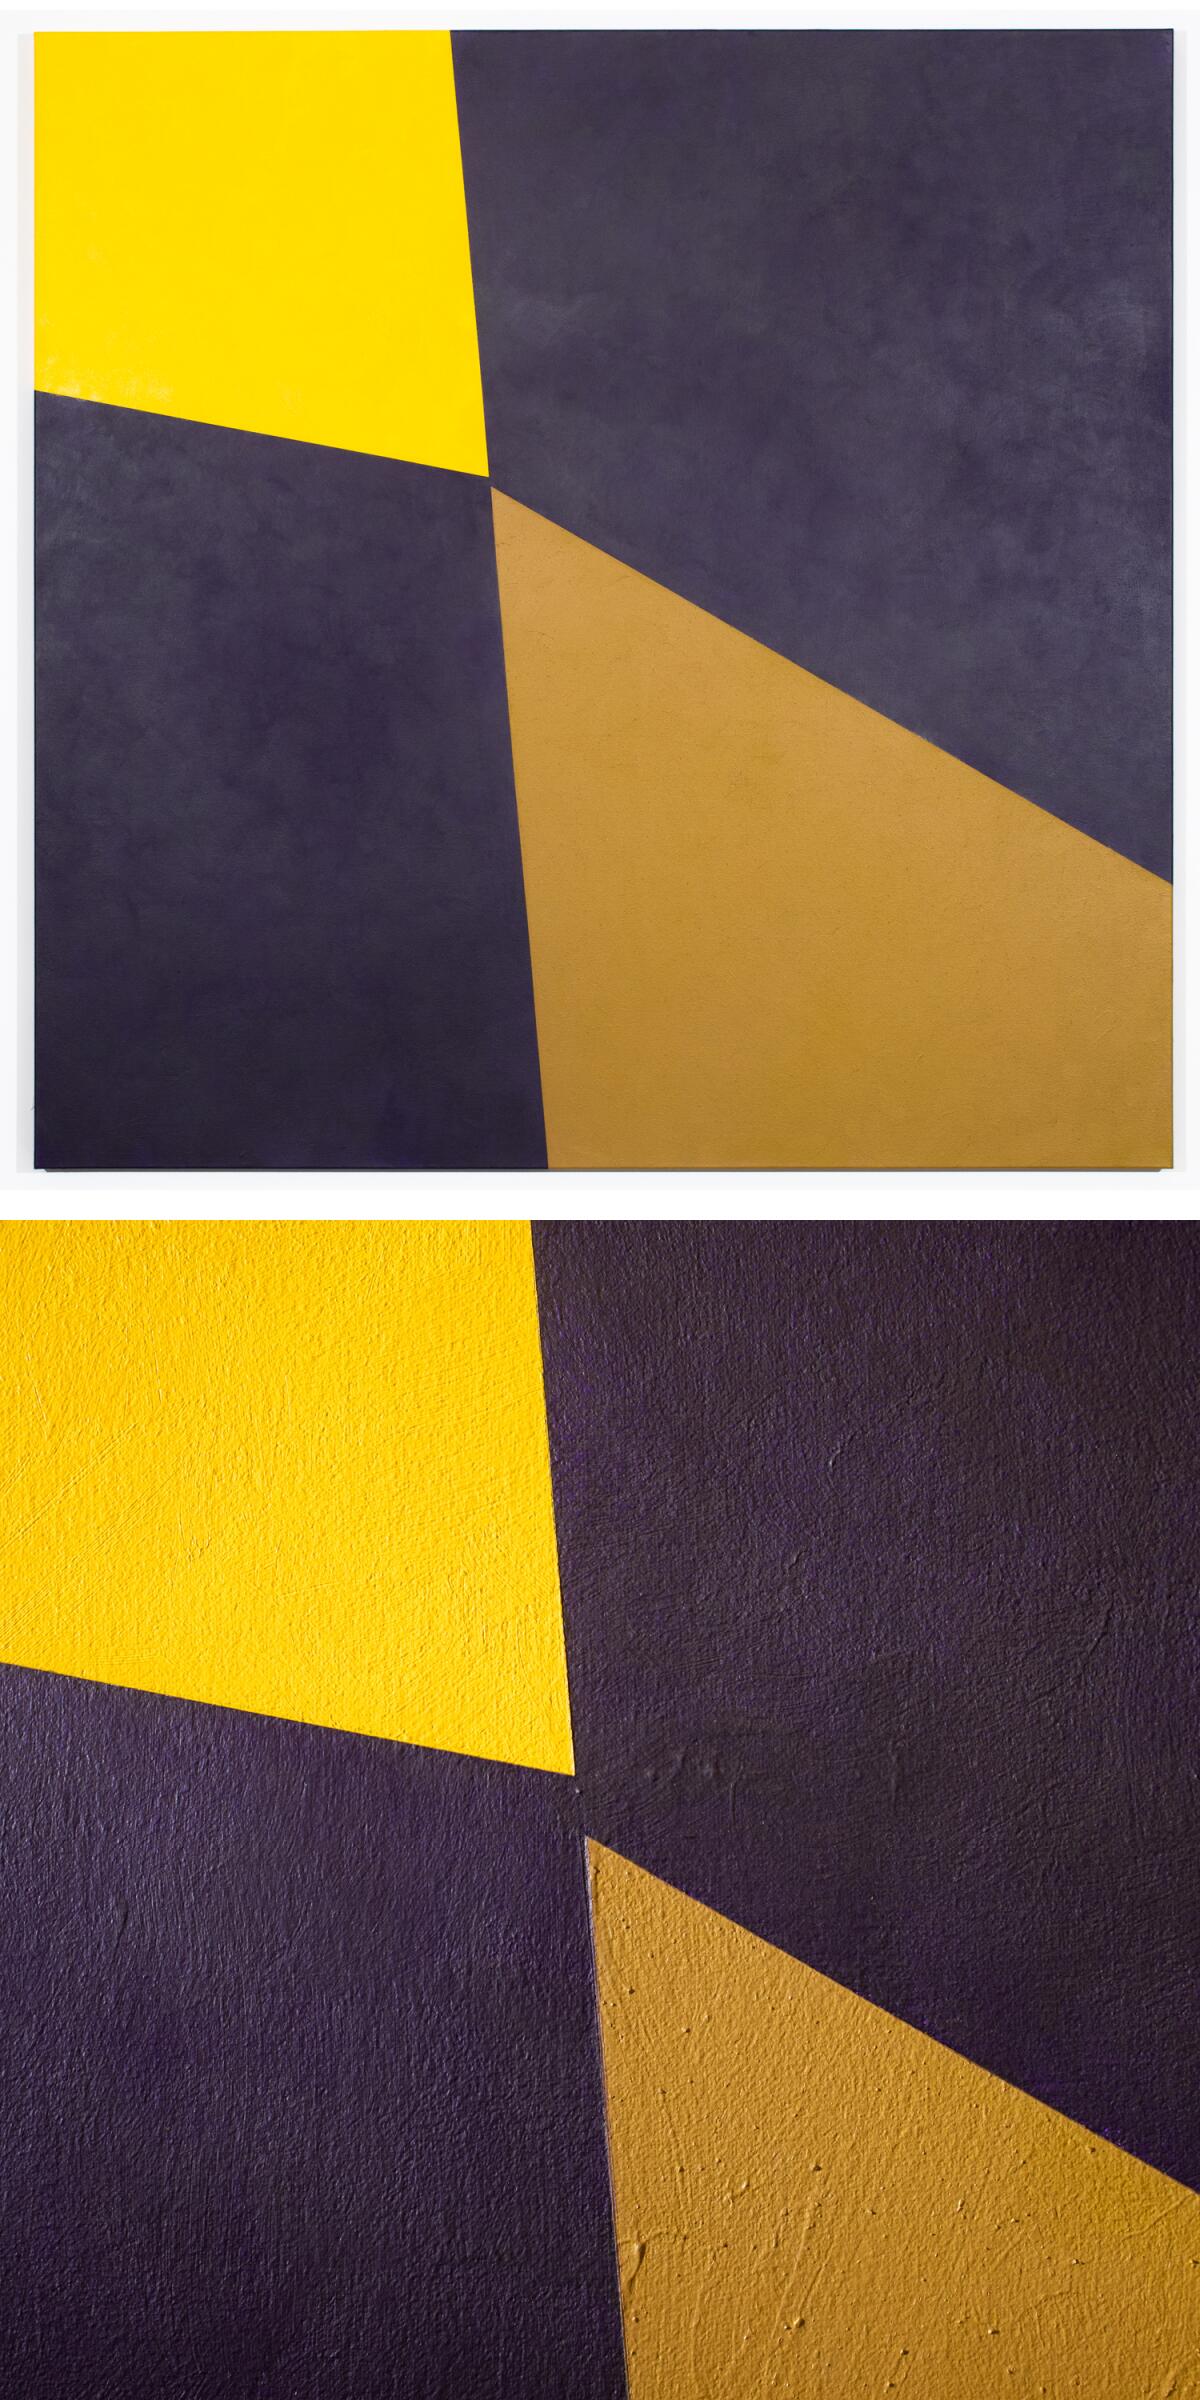 A diptych showing Virginia Jaramillo's work with a detail photo showing texture below.